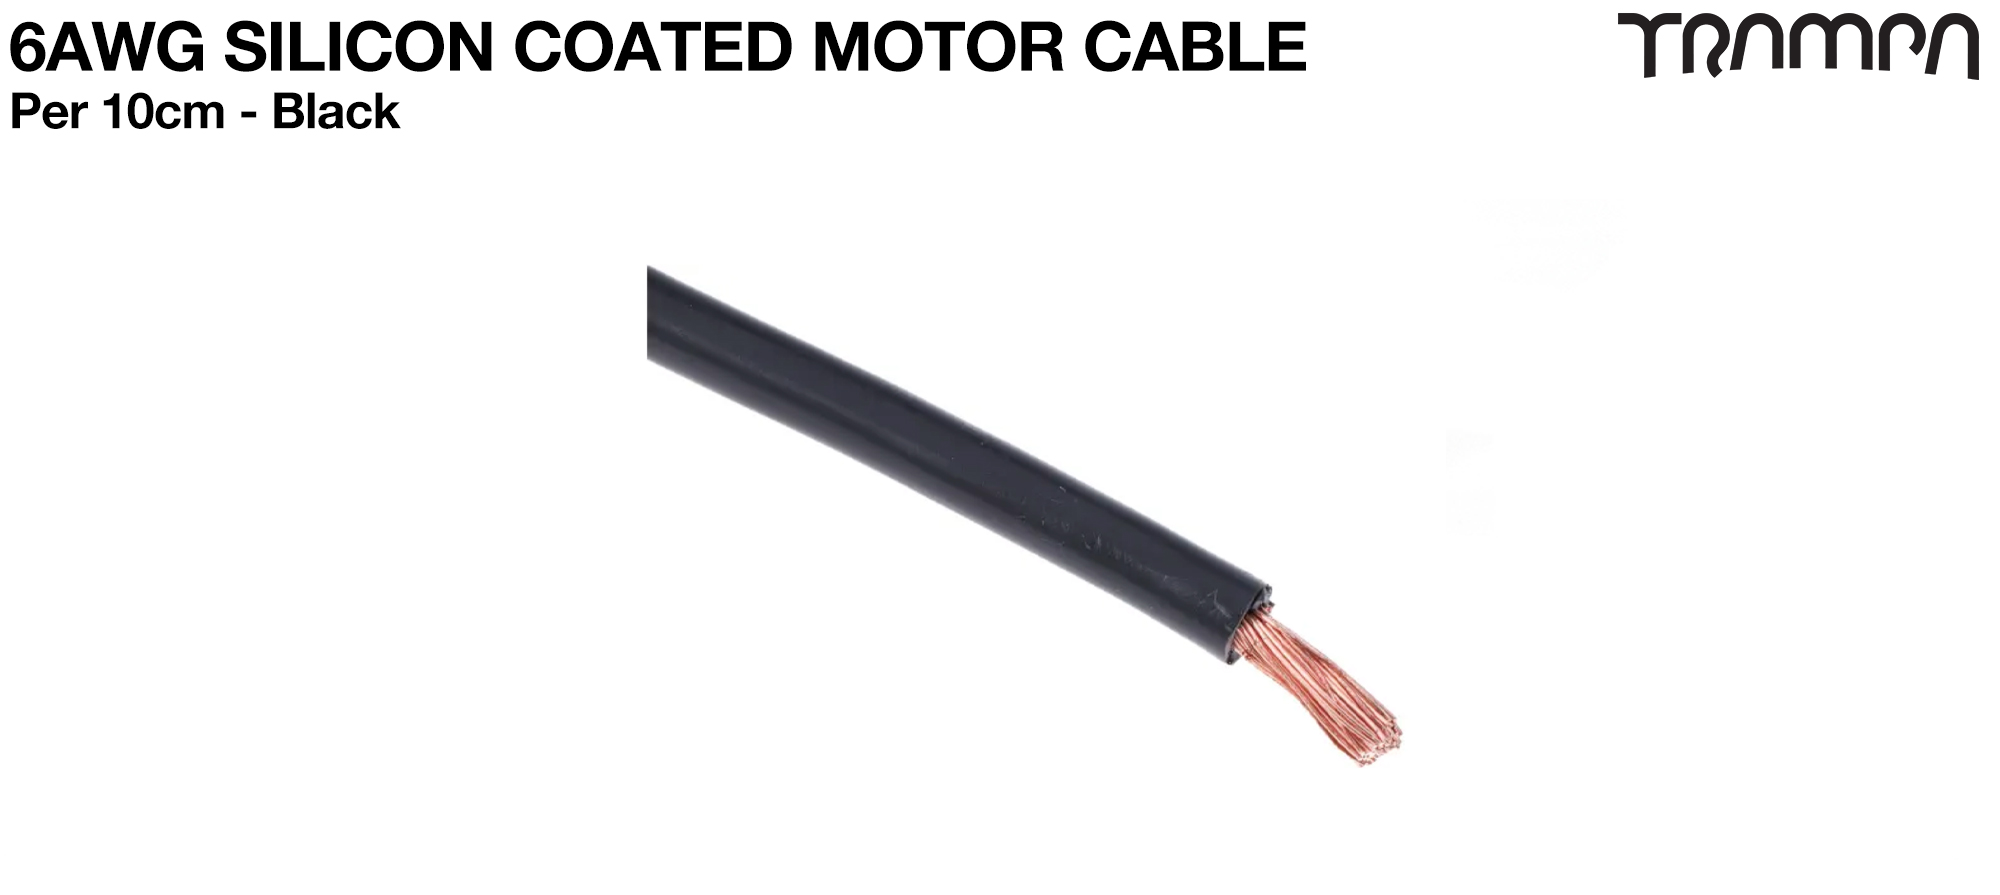 6AWG Silicon Coated Motor Cable BLACK - 10cm